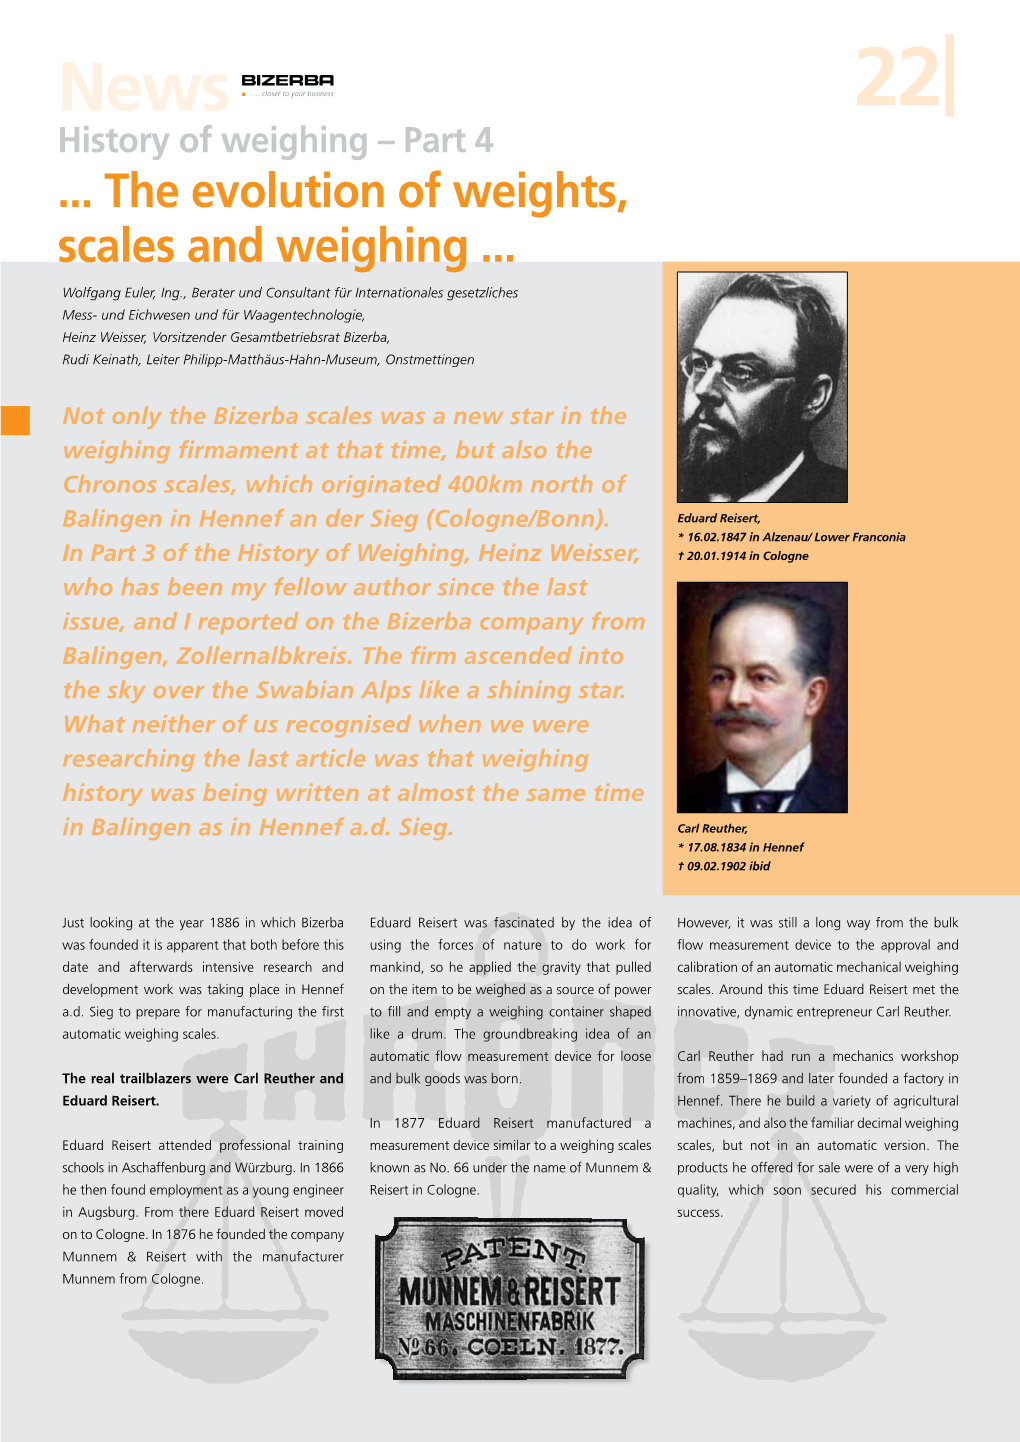 The Evolution of Weights, Scales and Weighing